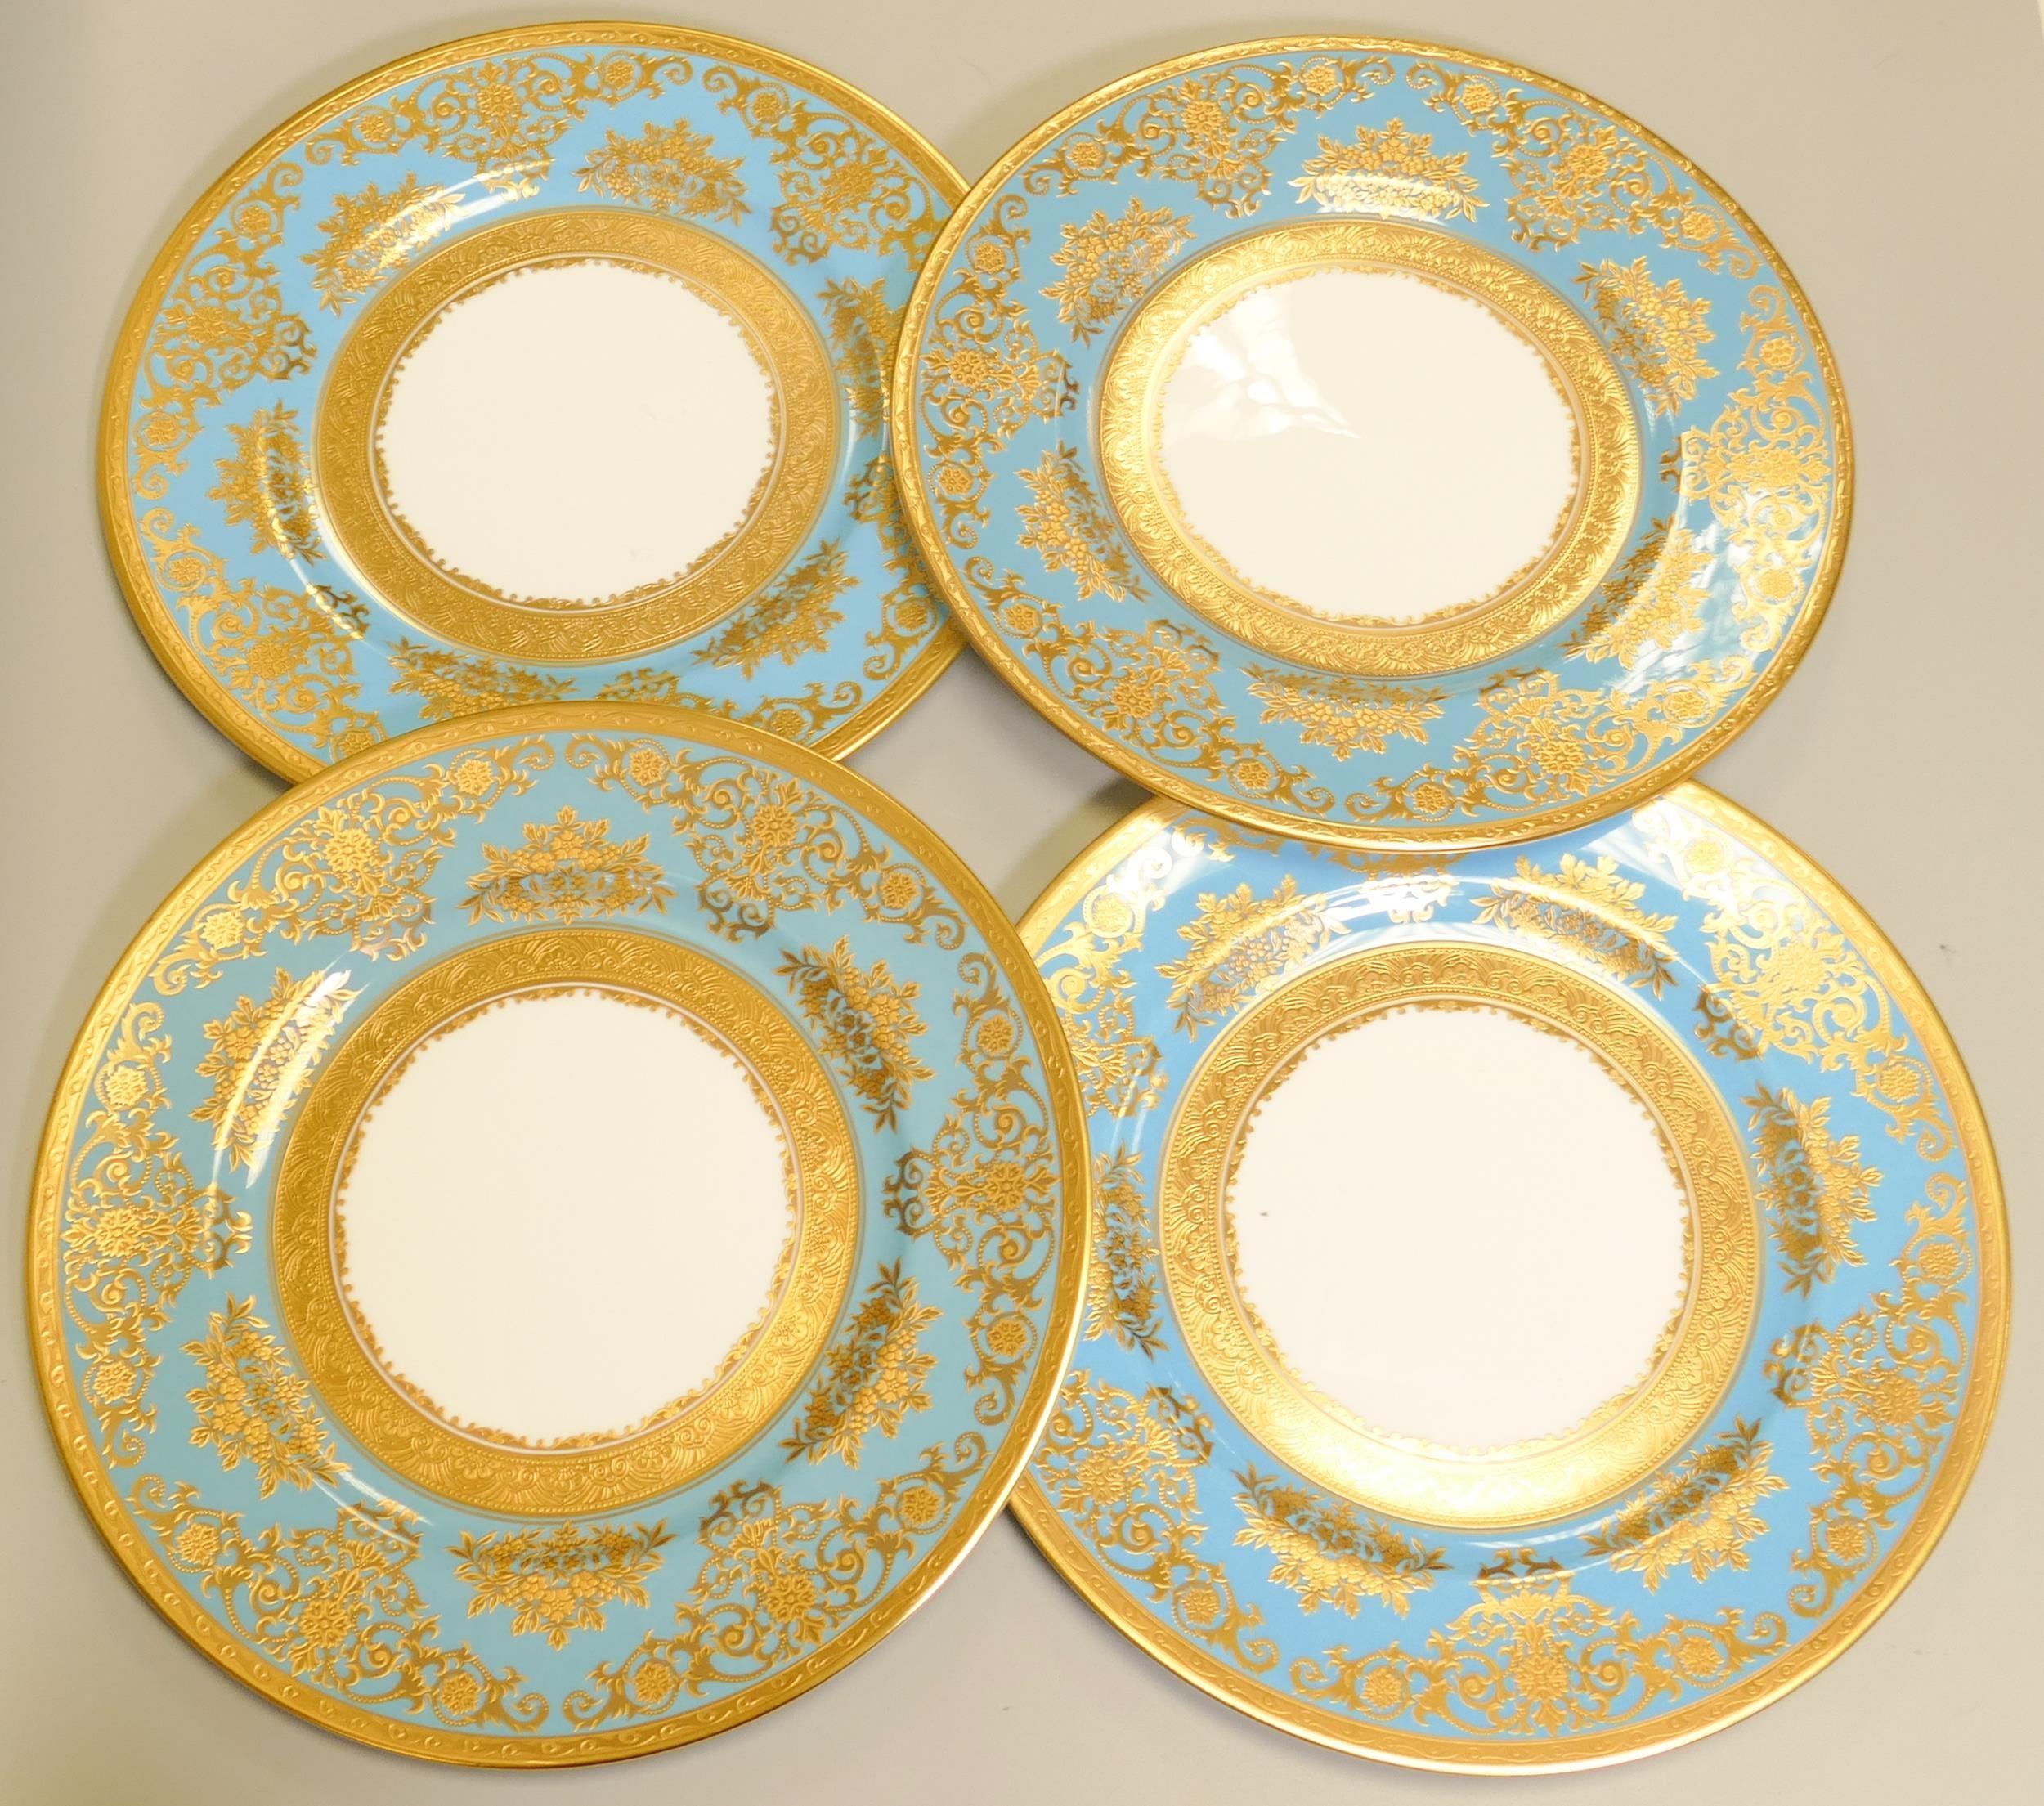 De Lamerie Fine Bone China heavily gilded Turquoise Exotic Garden patterned dinner plates, specially